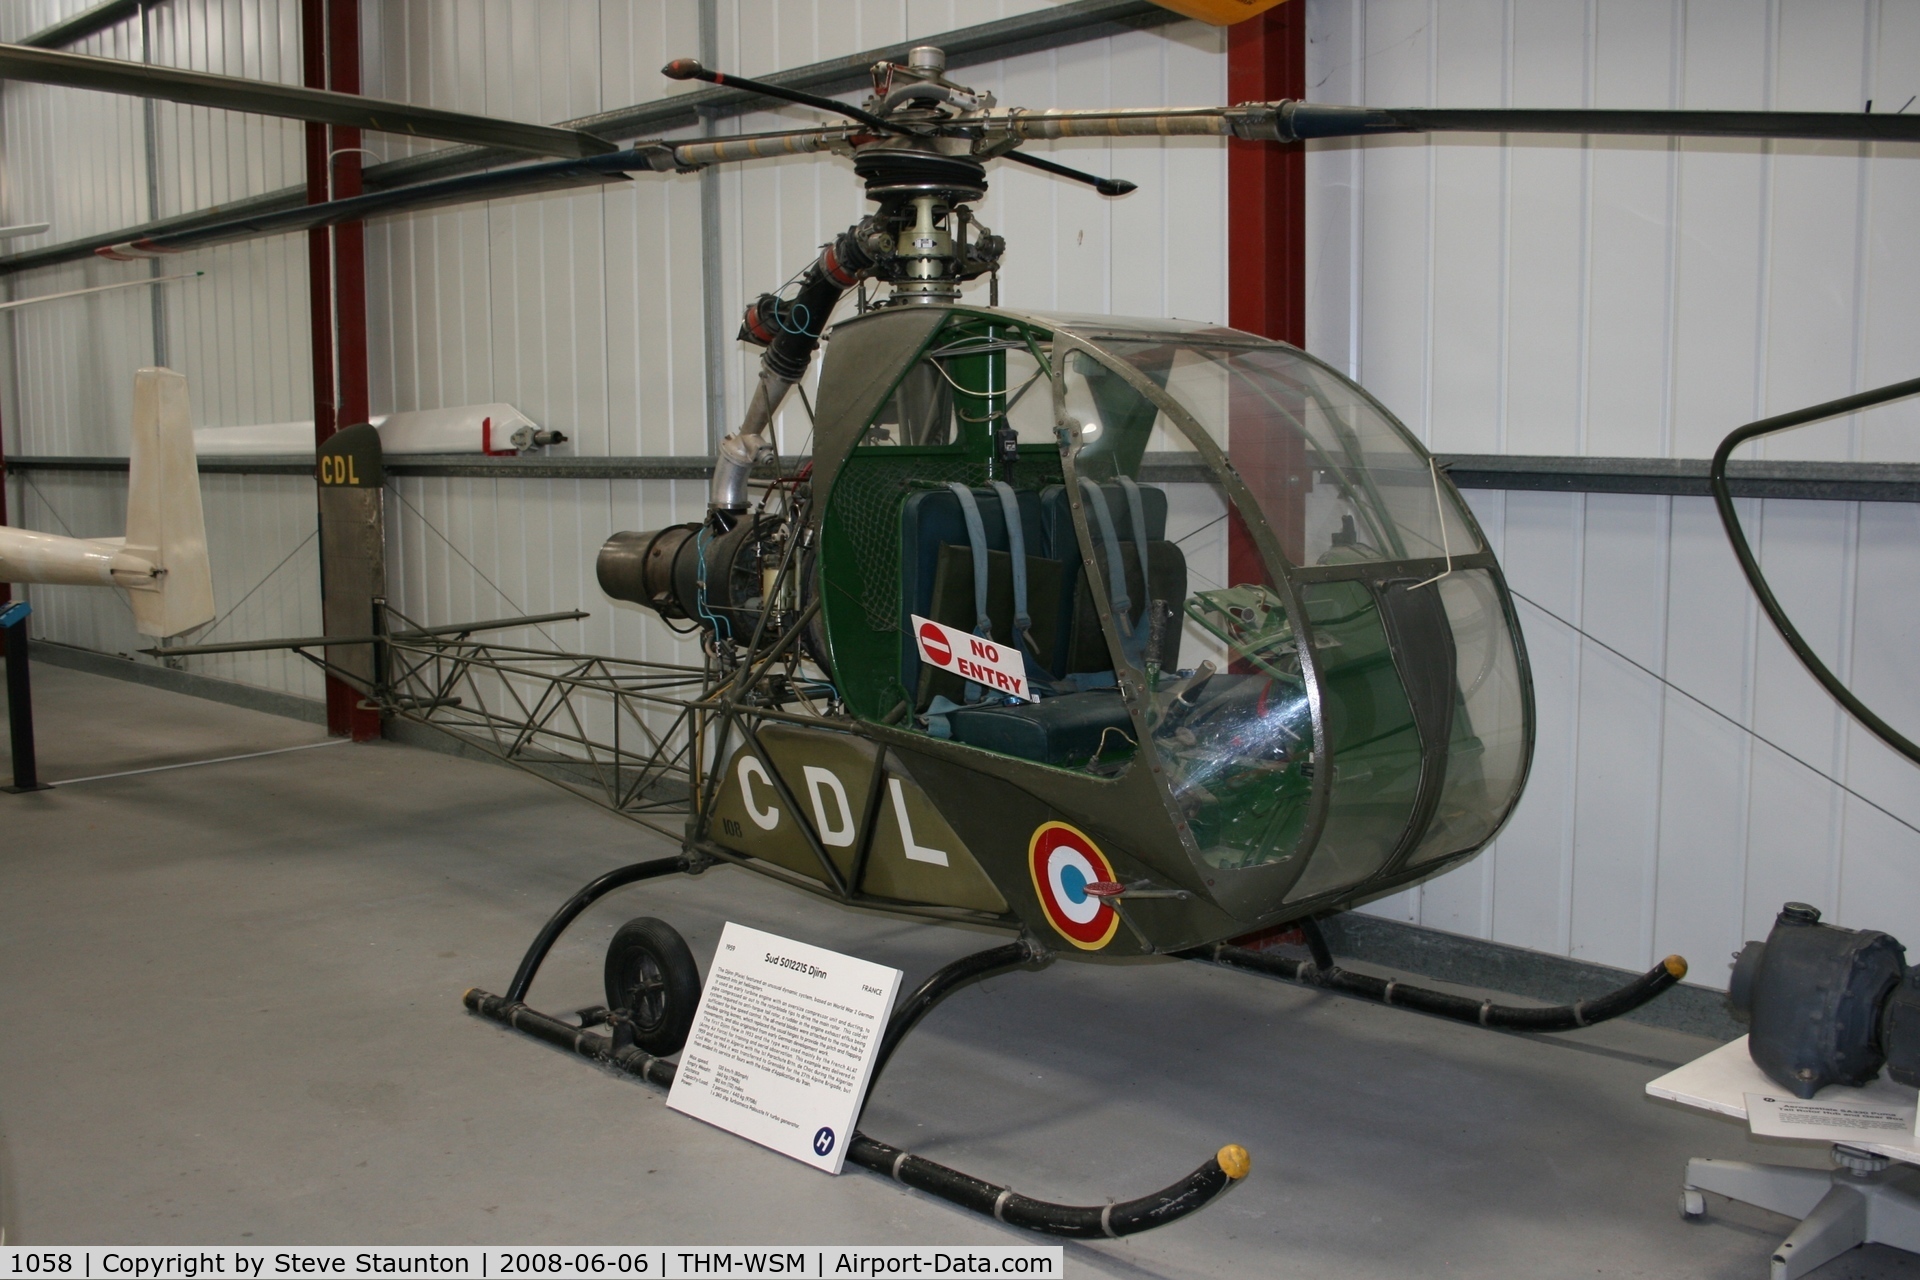 1058, 1959 Sud Ouest SO.1221 Djinn C/N FR108, Taken at the Helicopter Museum (http://www.helicoptermuseum.co.uk/)